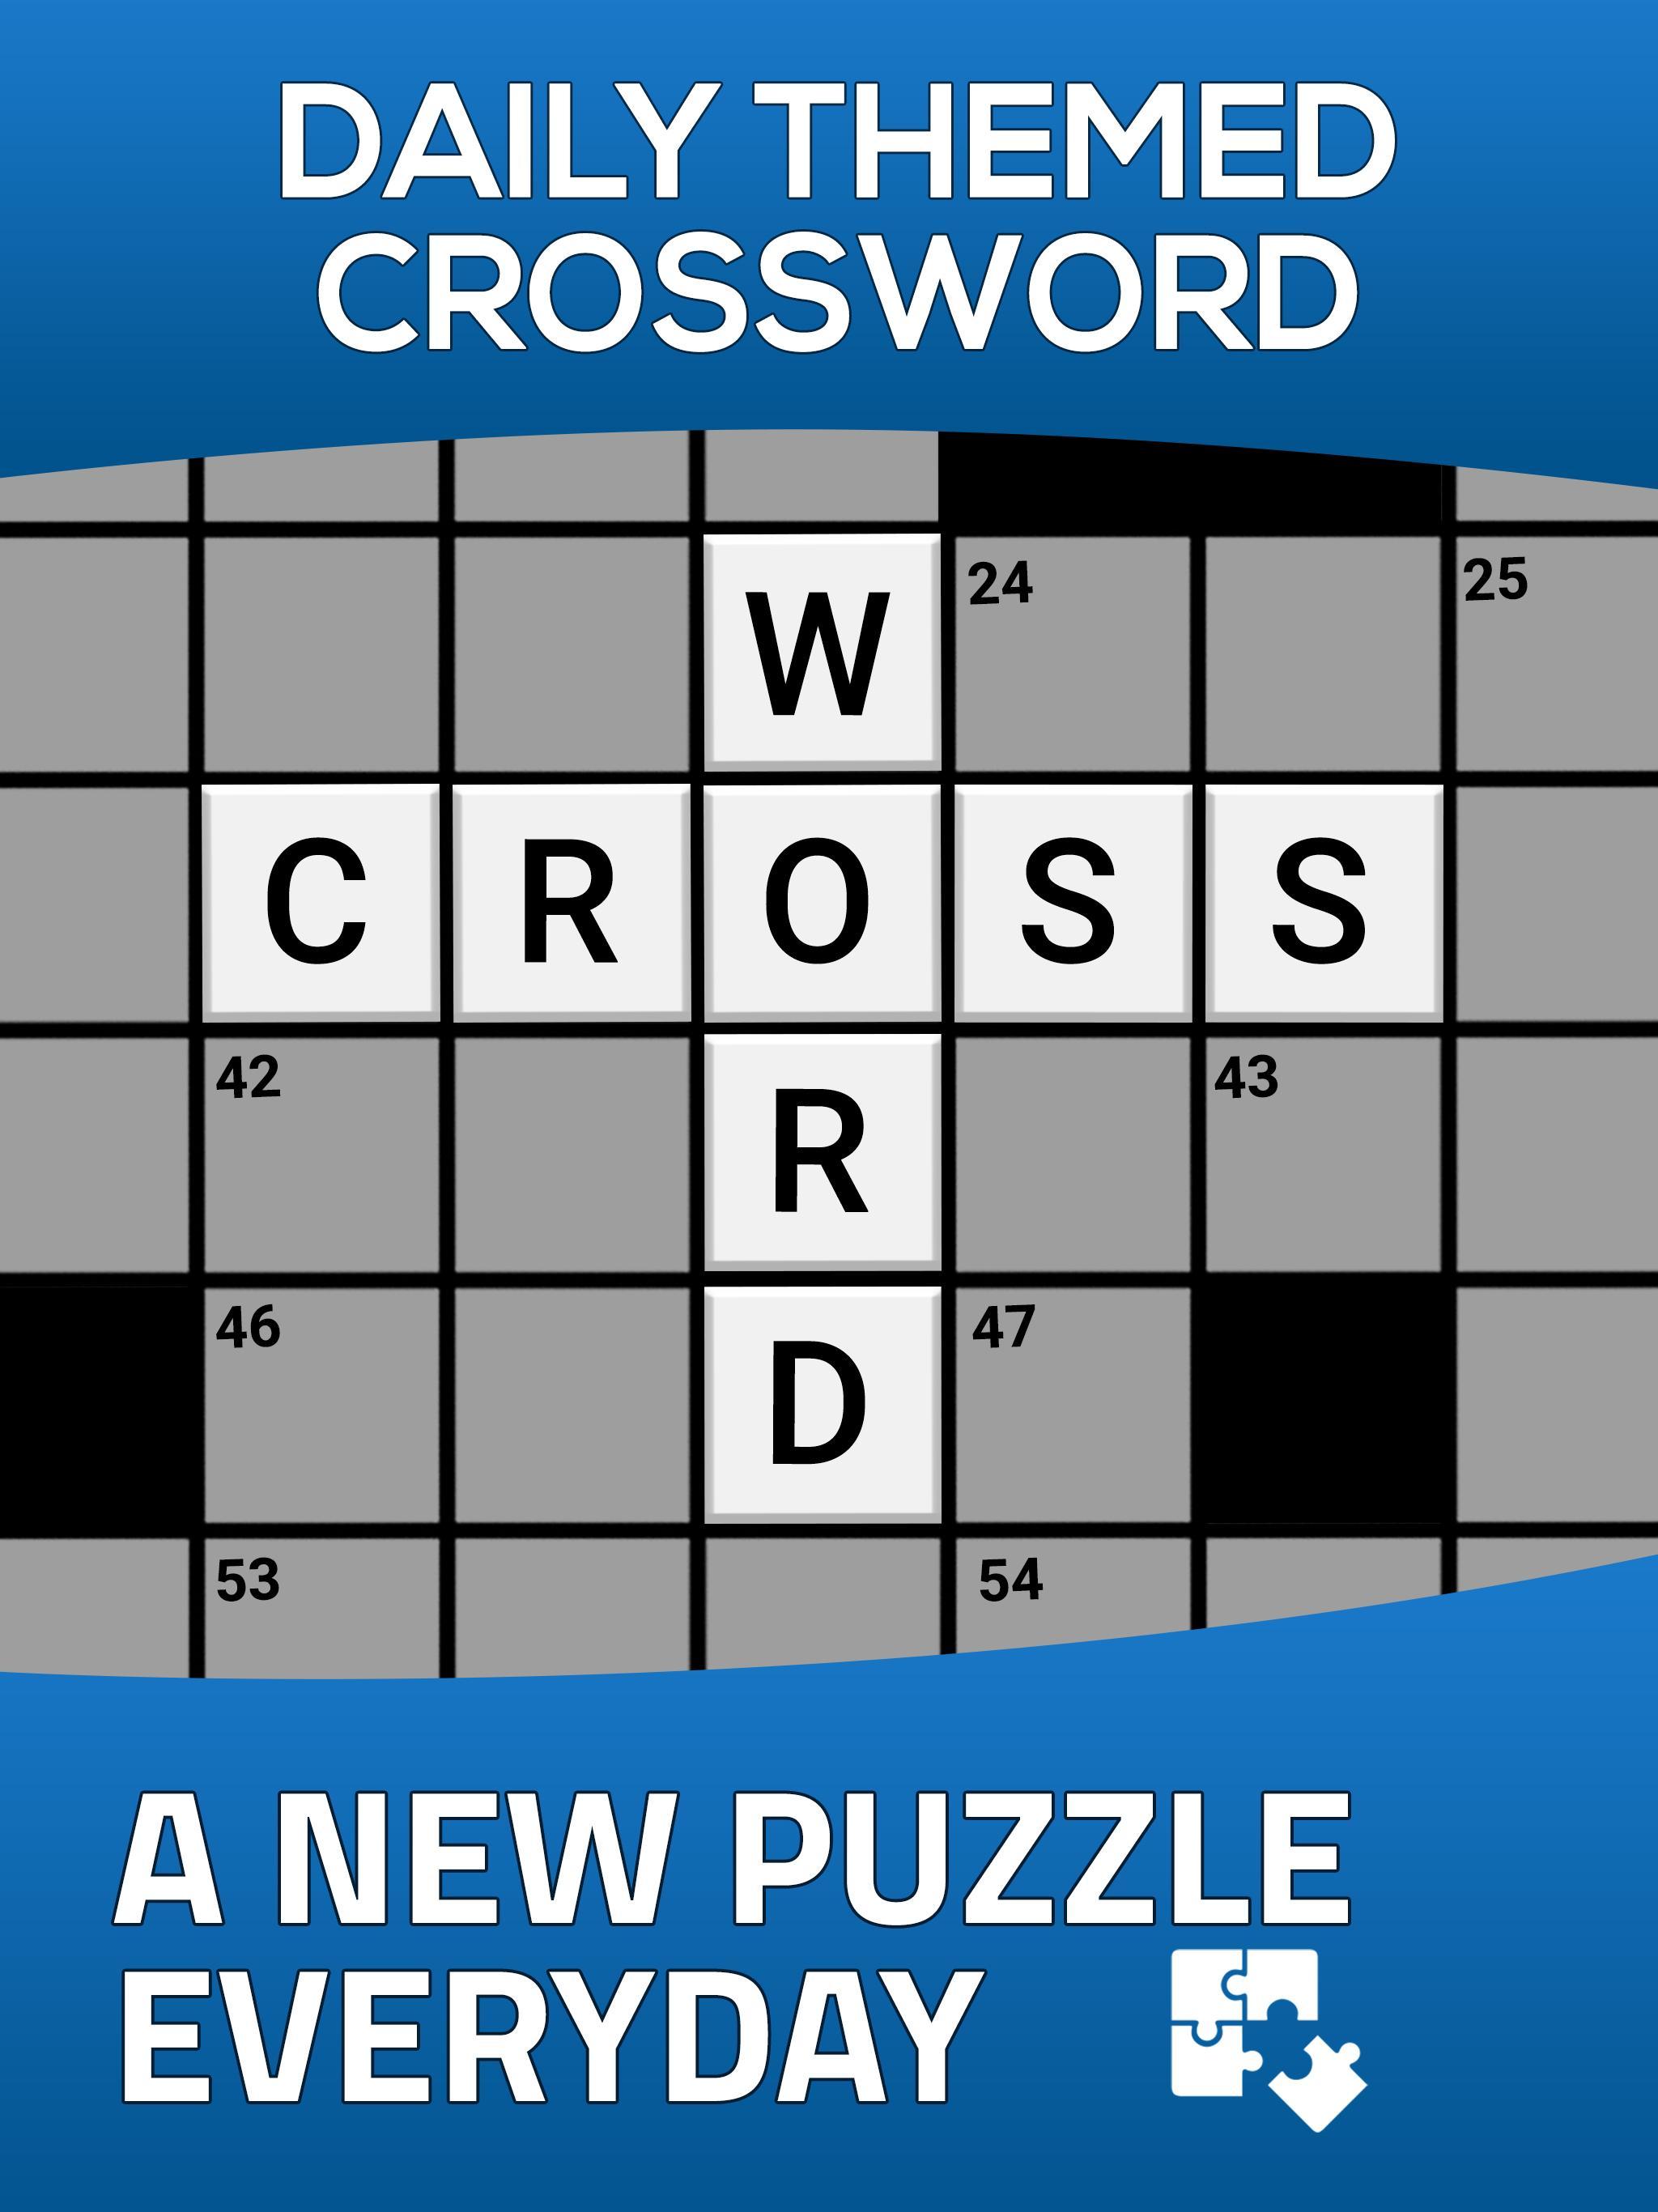 Daily Themed Crossword for Android - APK Download